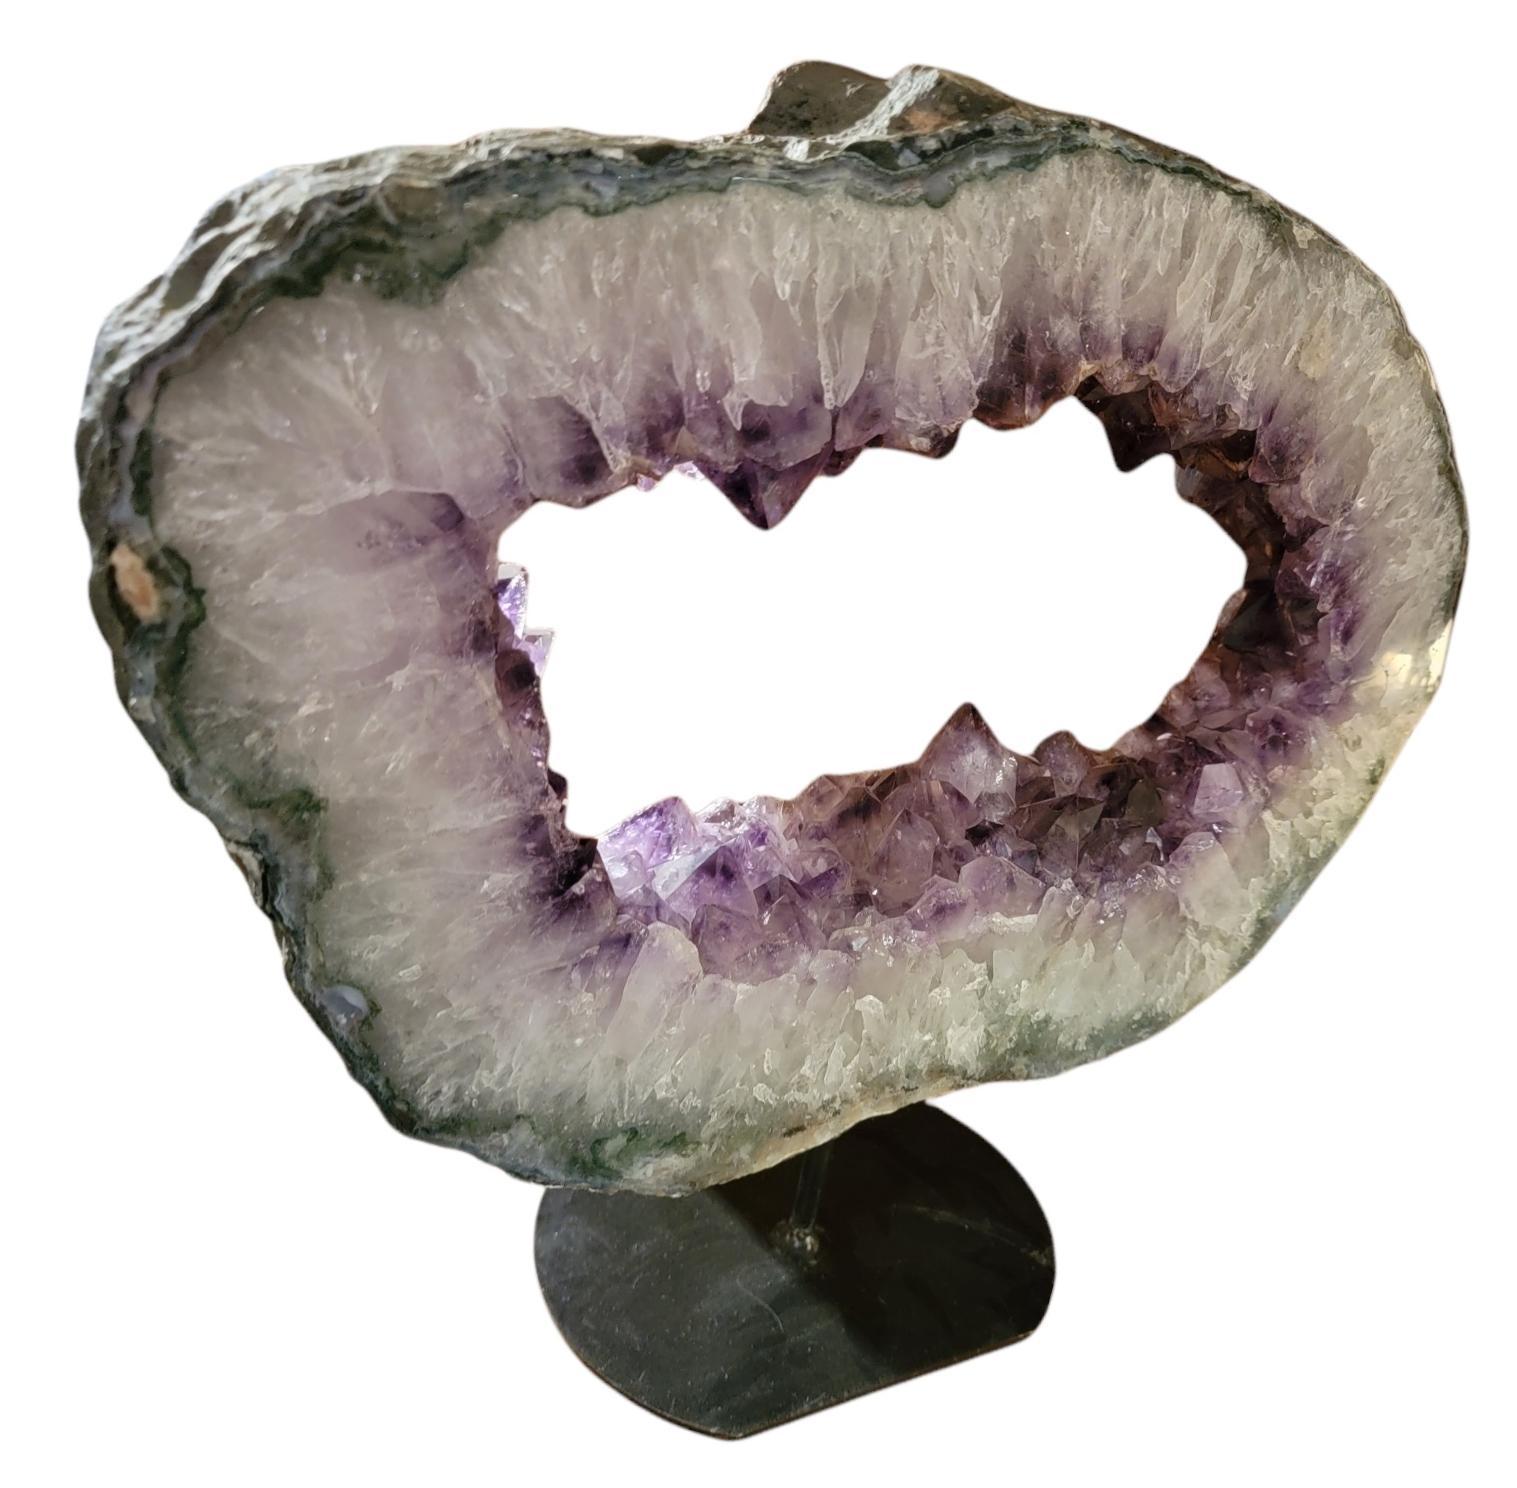 Amethyst Geode Stone on Iron Stand measurements are approx 18 w x 15 high x 5.5 deep with stand 15.5 high and base diameter is 8.